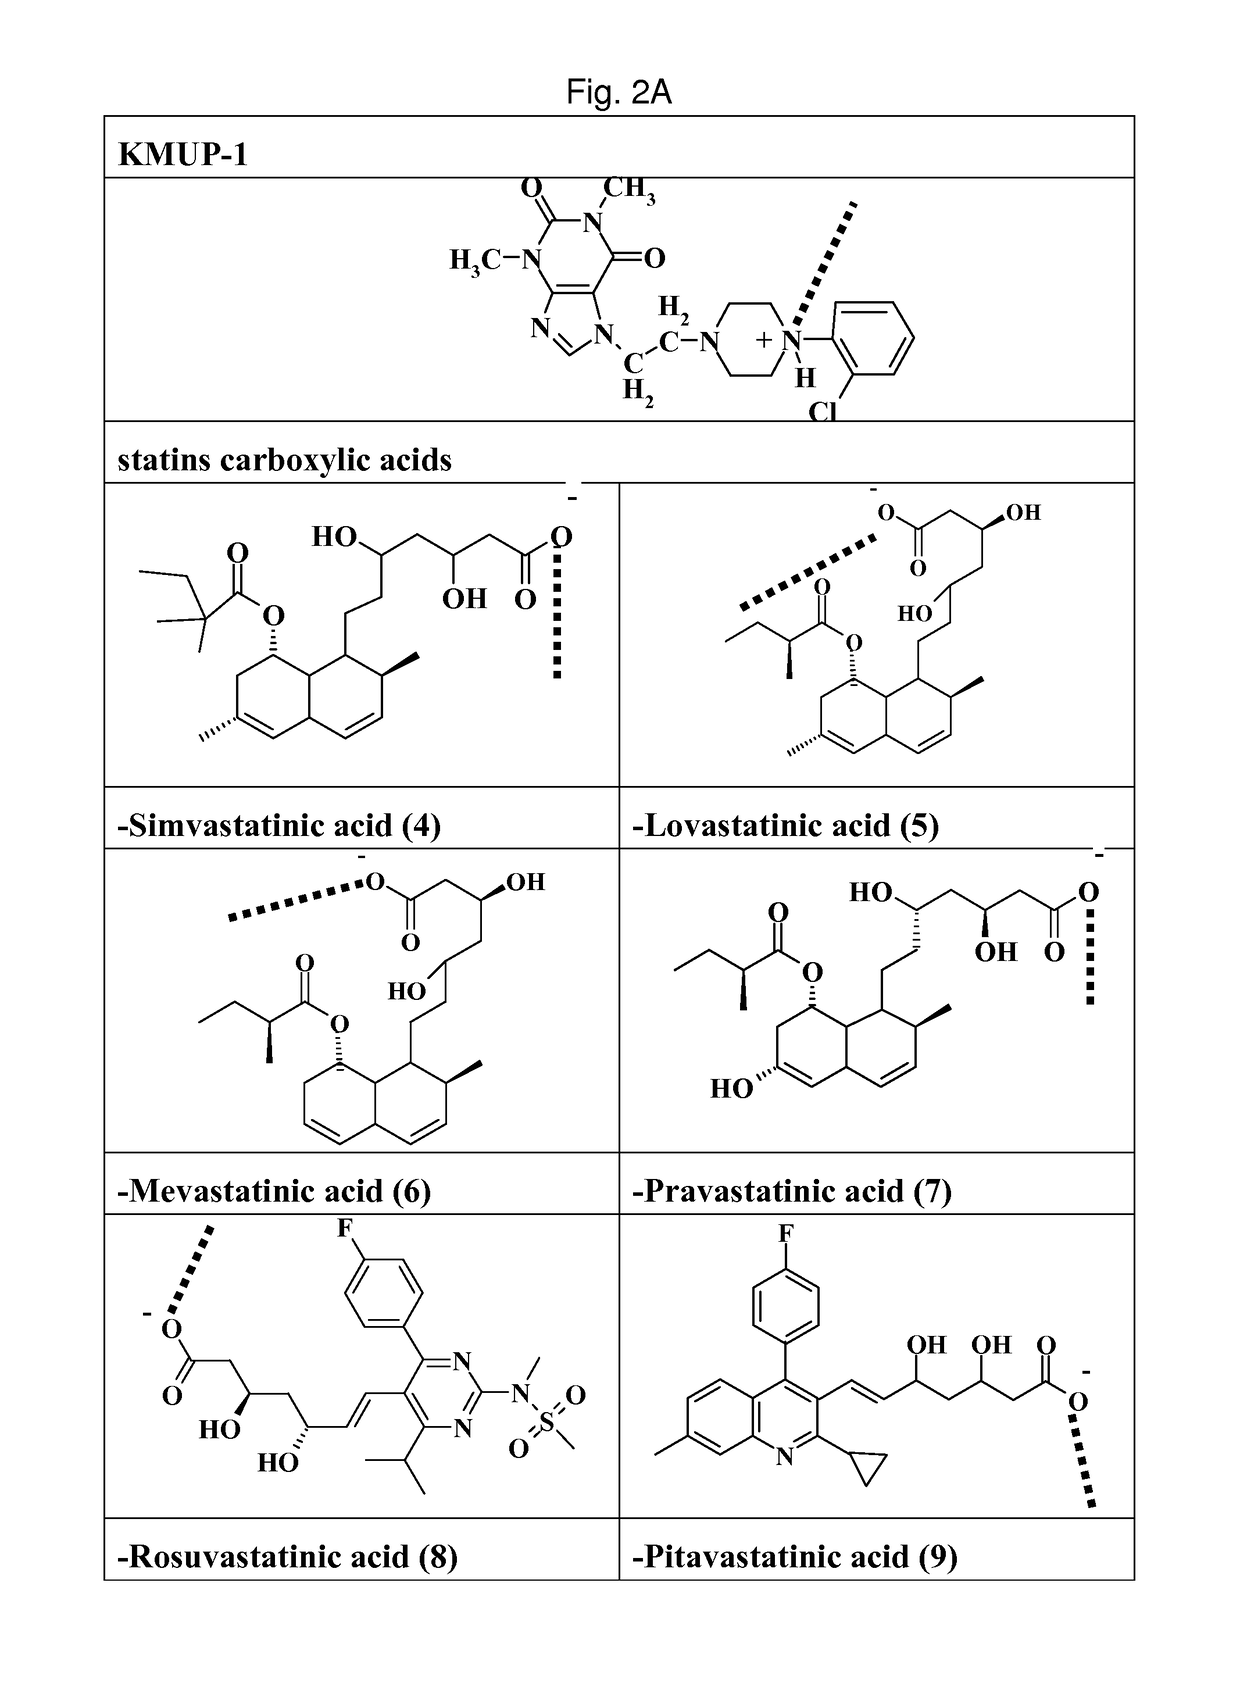 Processes for preparing piperazinium salts of KMUP and use thereof